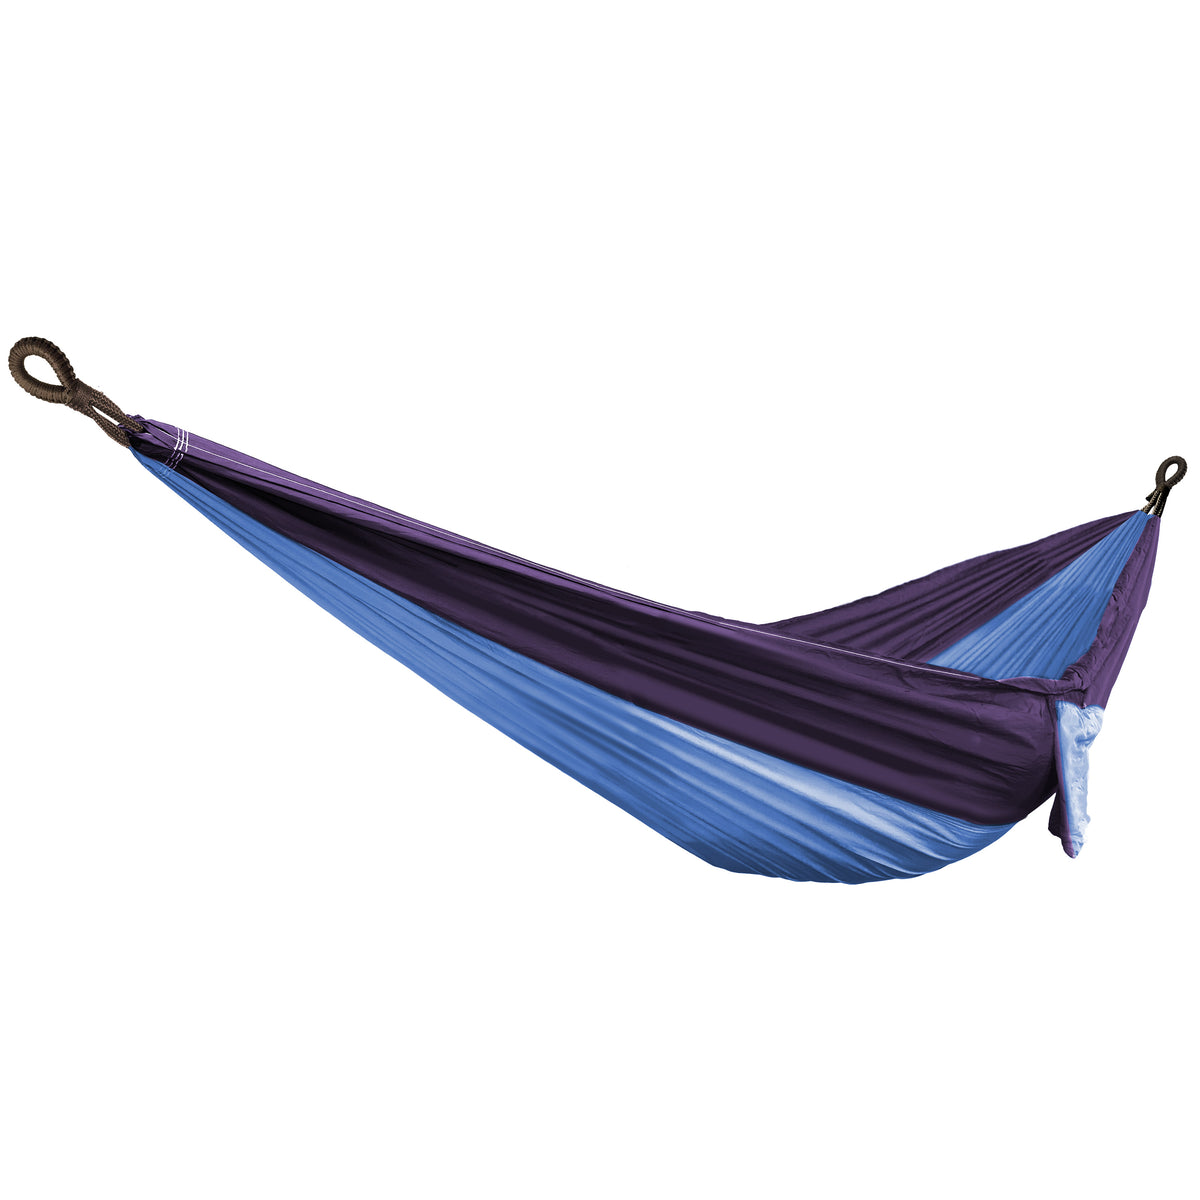 Bliss Hammocks Hammock in a Bag with adjustable tree straps in the royal bliss variation.